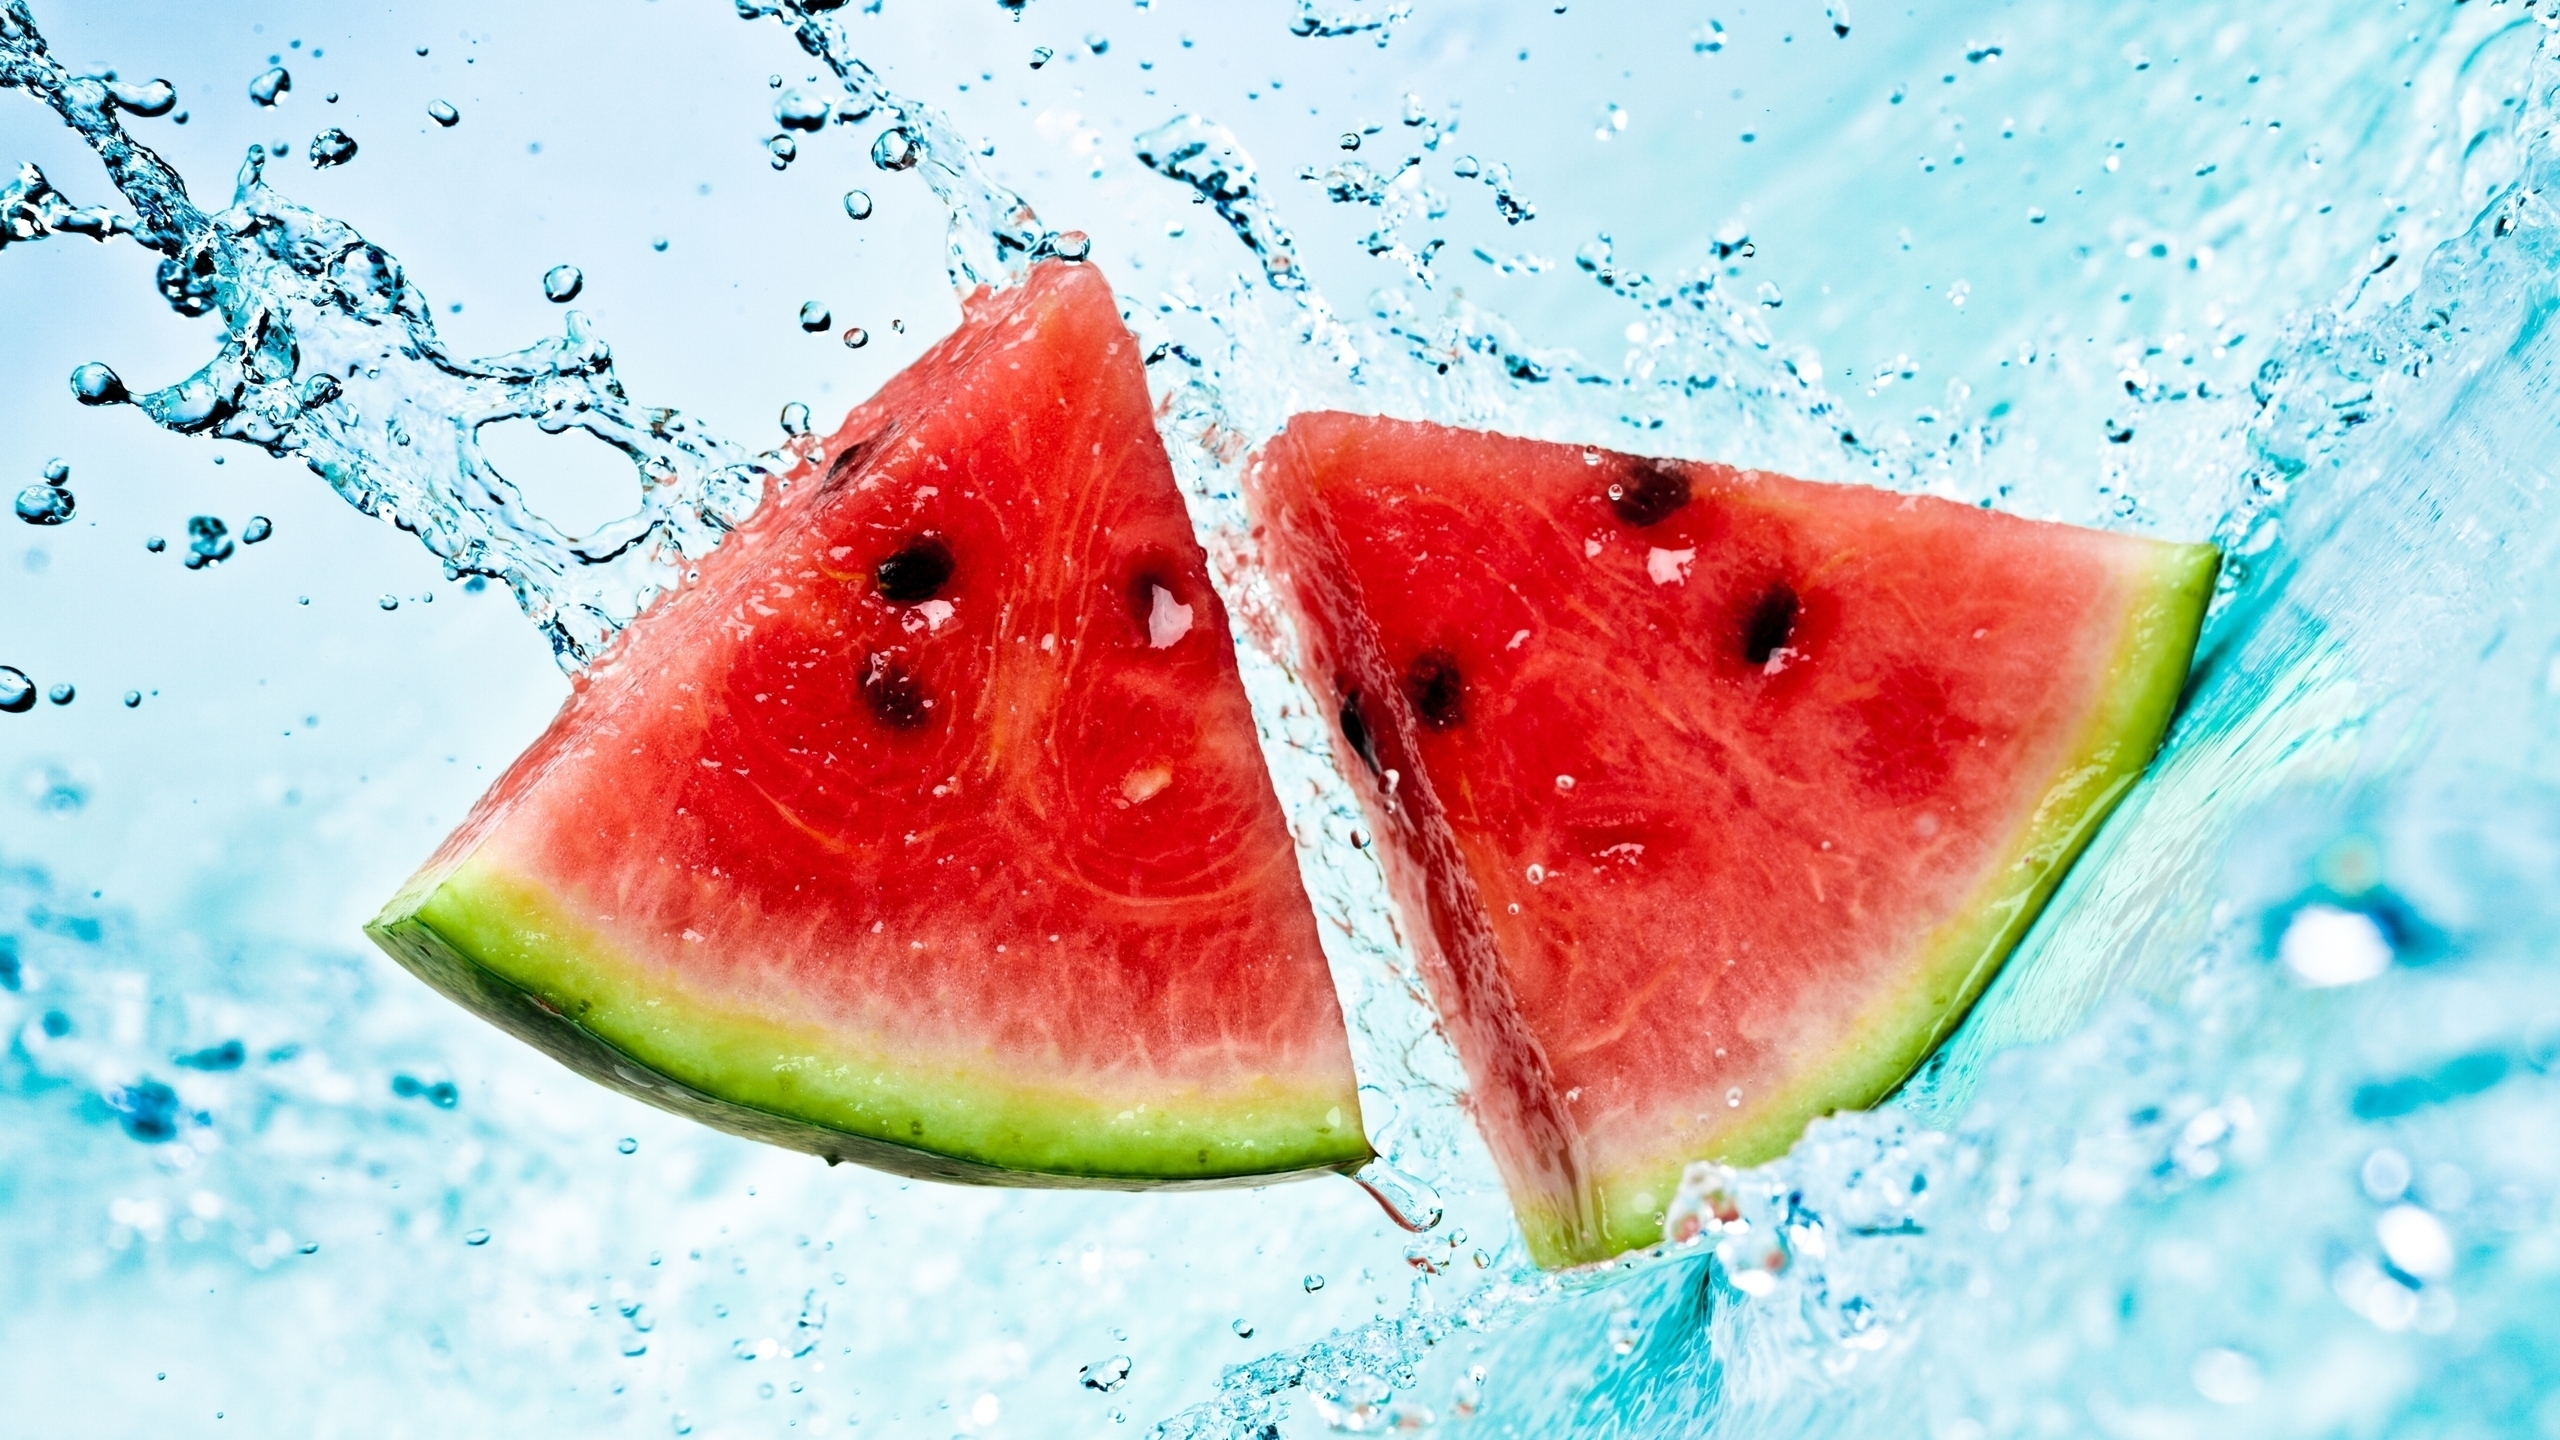 Watermelon Slices for 2560x1440 HDTV resolution